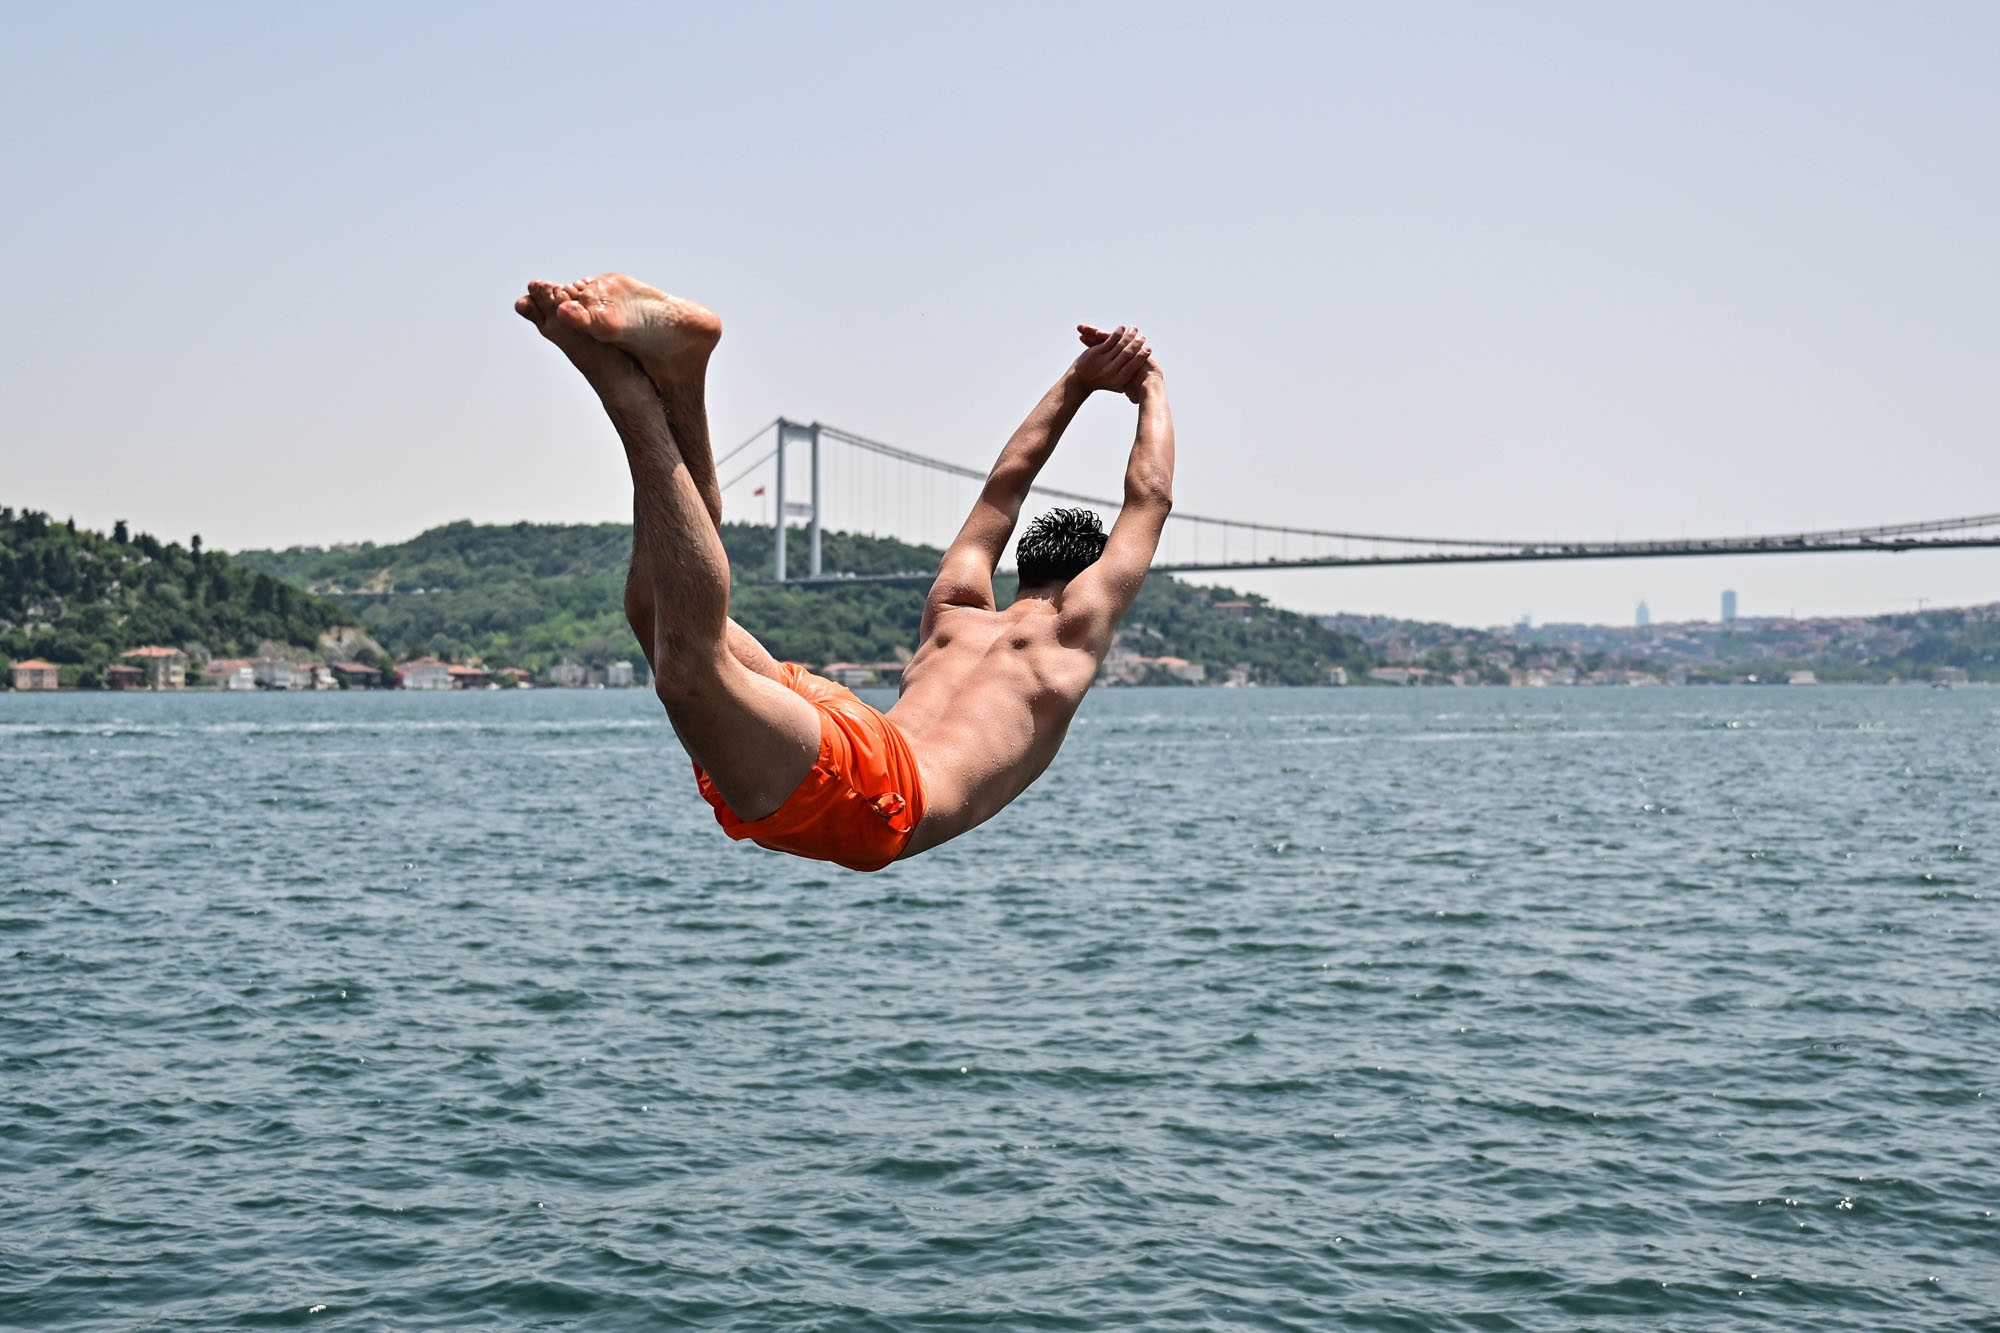 A man jumps into the sea to cool himself off during hot weather in Istanbul, Turkey.